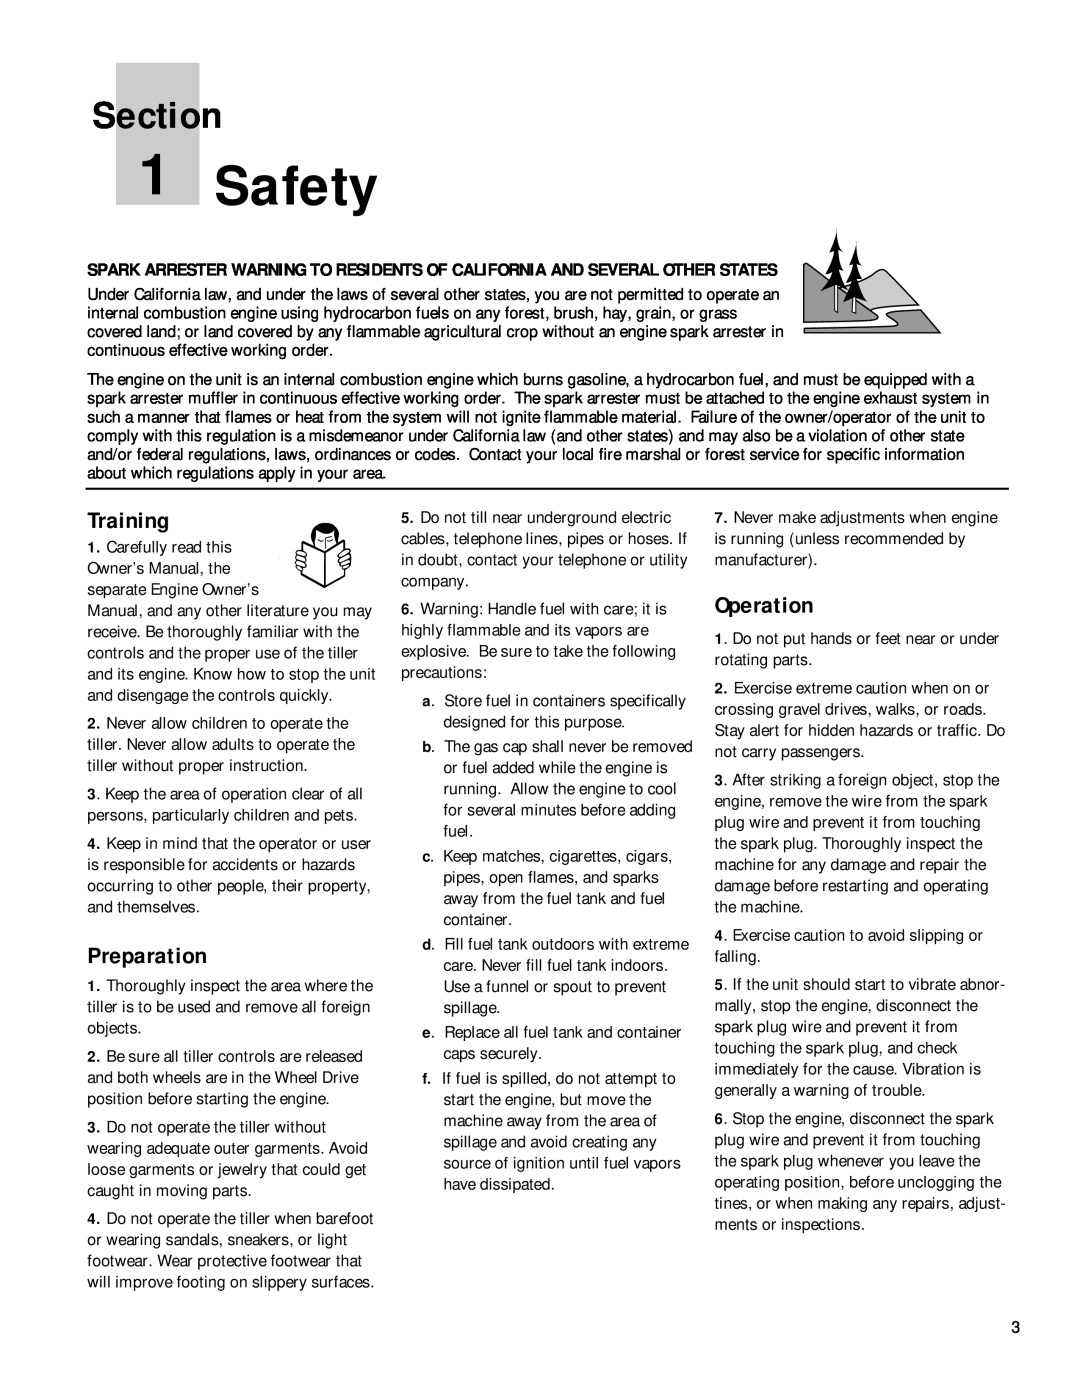 Bolens 12180 owner manual Safety, Section, Training, Preparation, Operation 